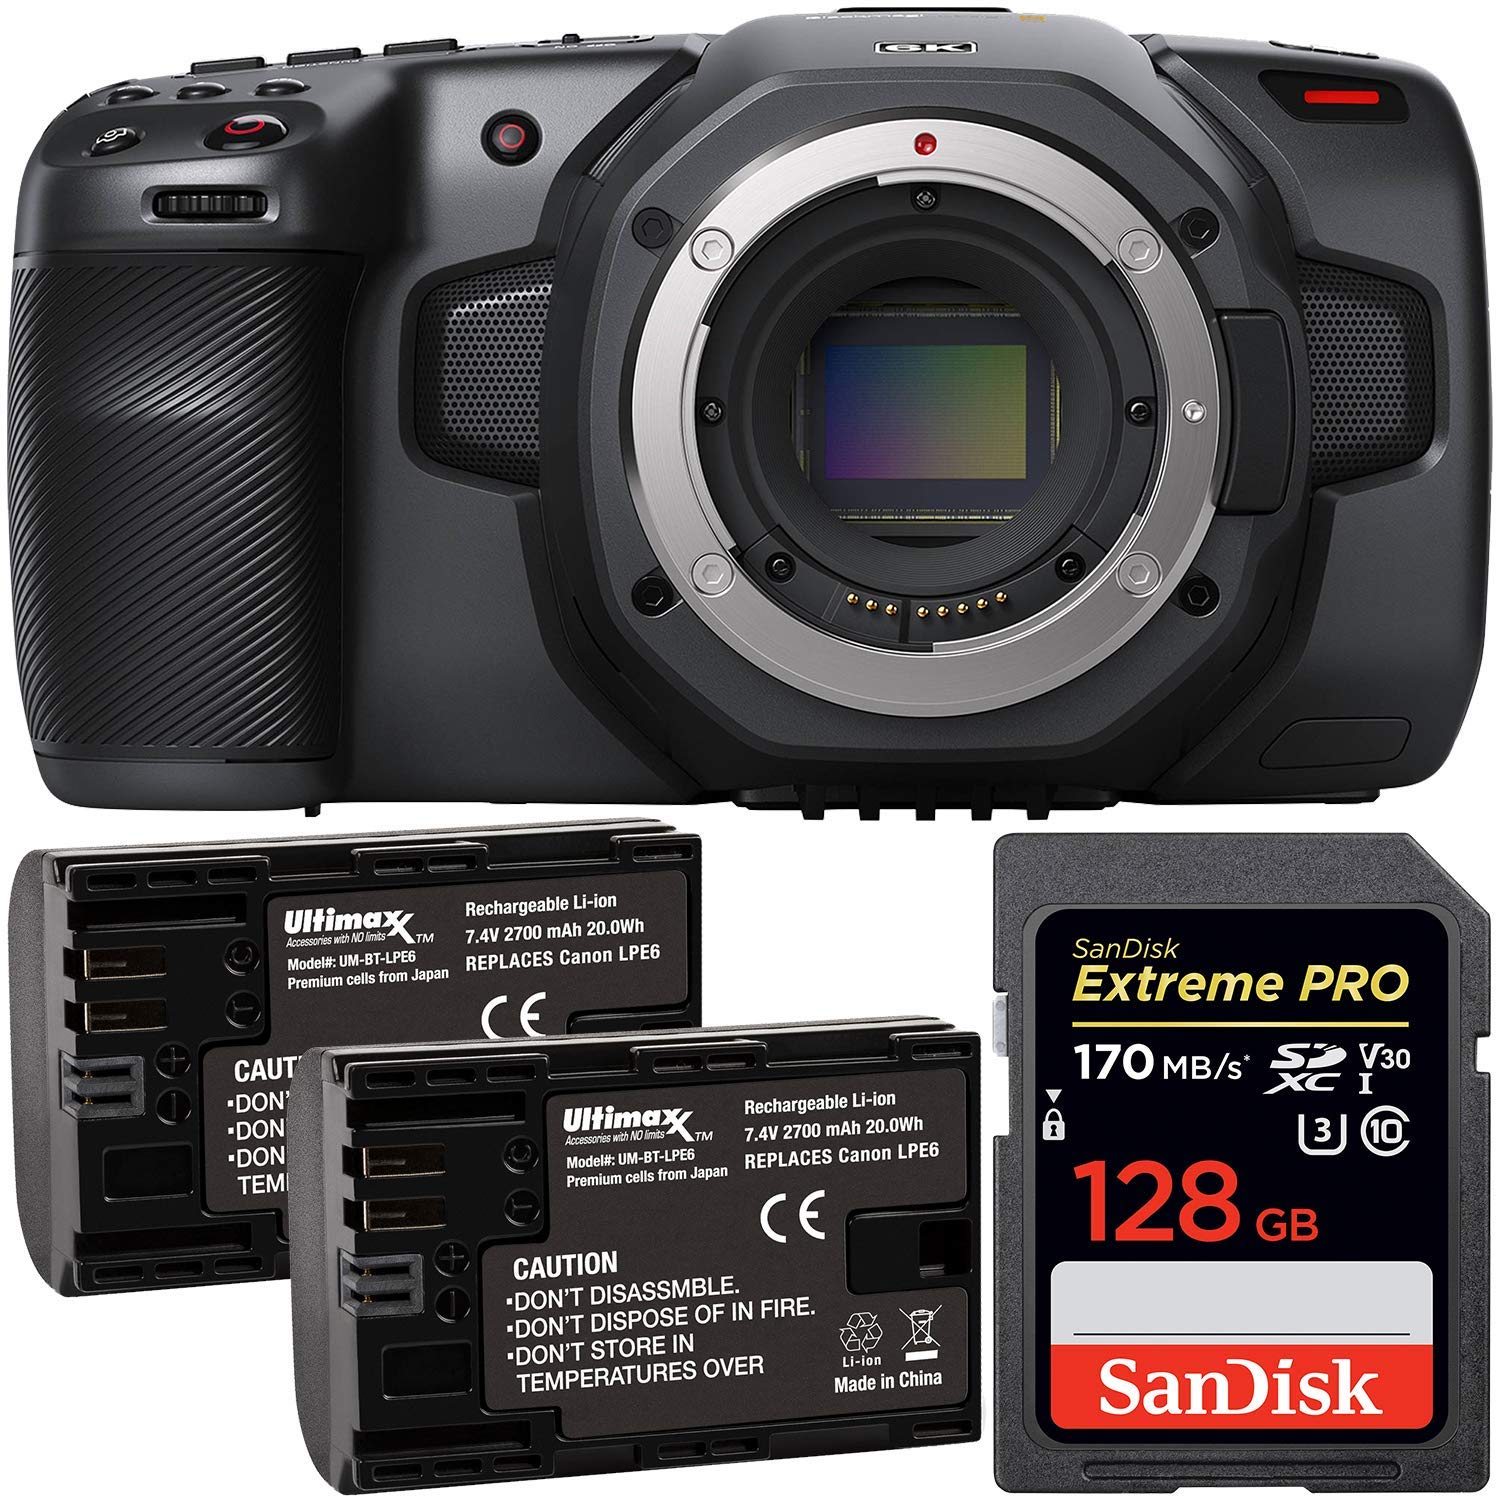 Blackmagic Design Pocket Cinema Camera 6K (EF Mount) - CINECAMPOCHDEF6K with 128GB Memory Card and 2 LP-E6 Replacement Batteries